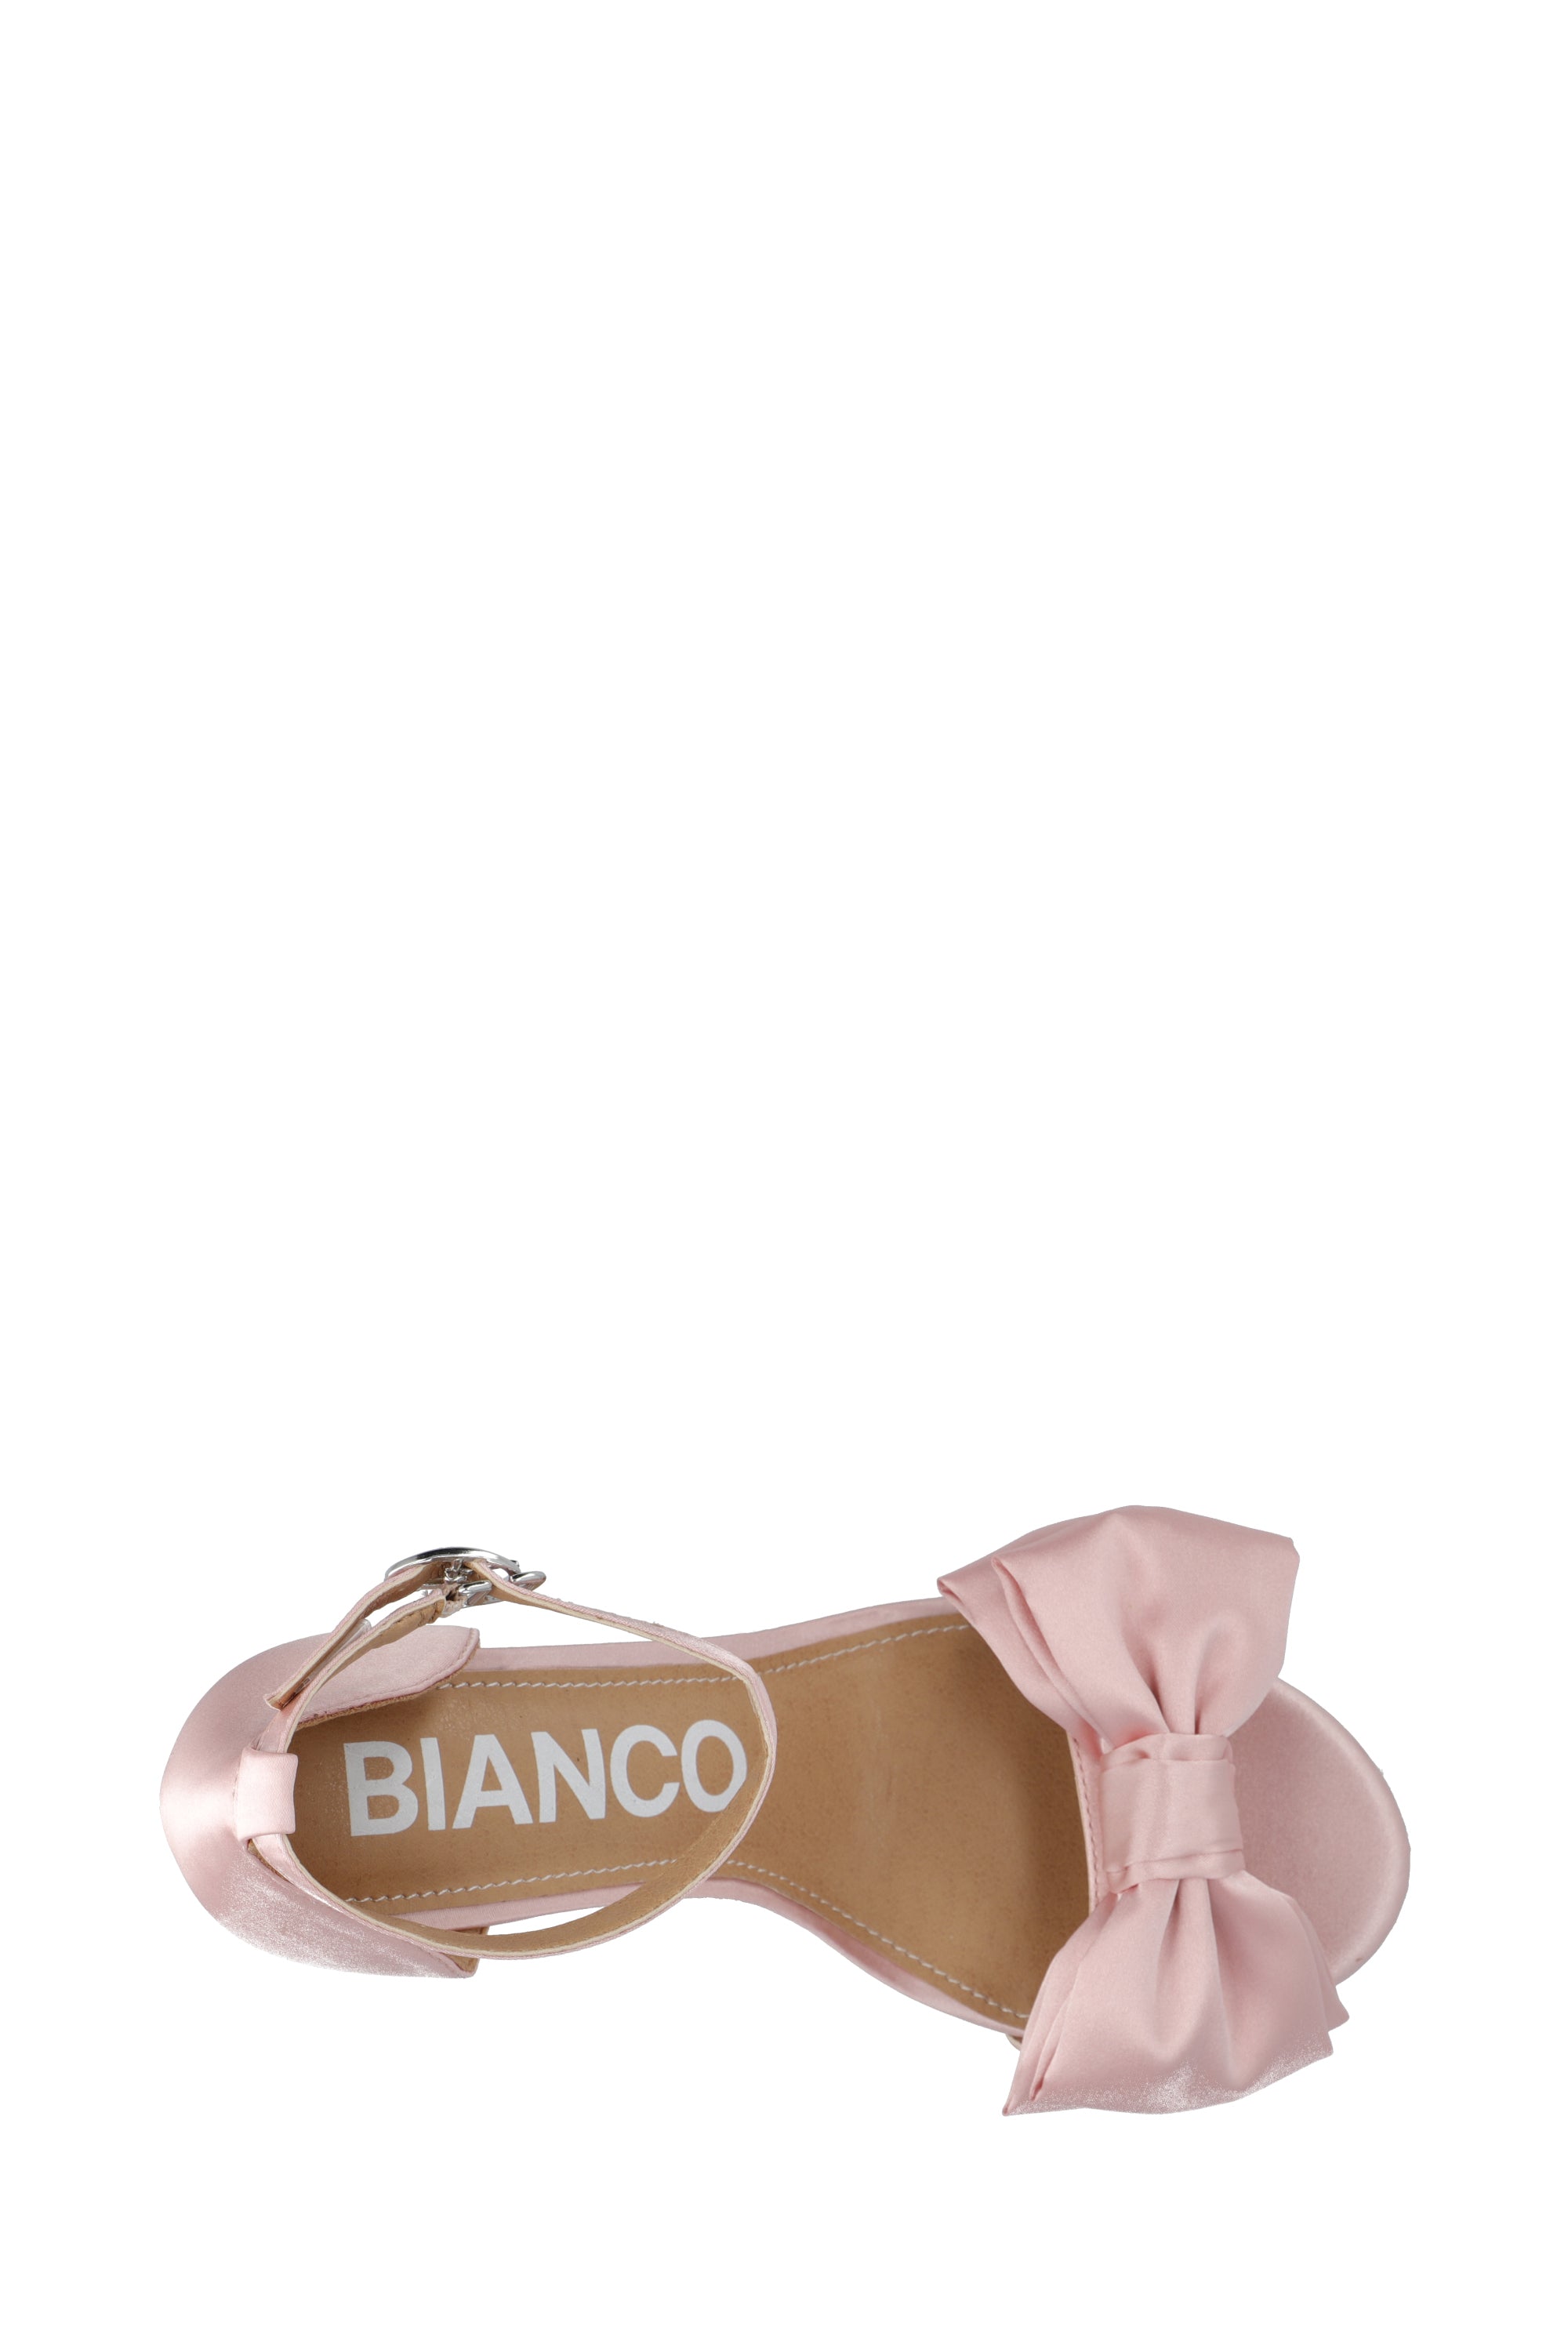 Biaadore Bow Sandal Satin - Dusty Pink